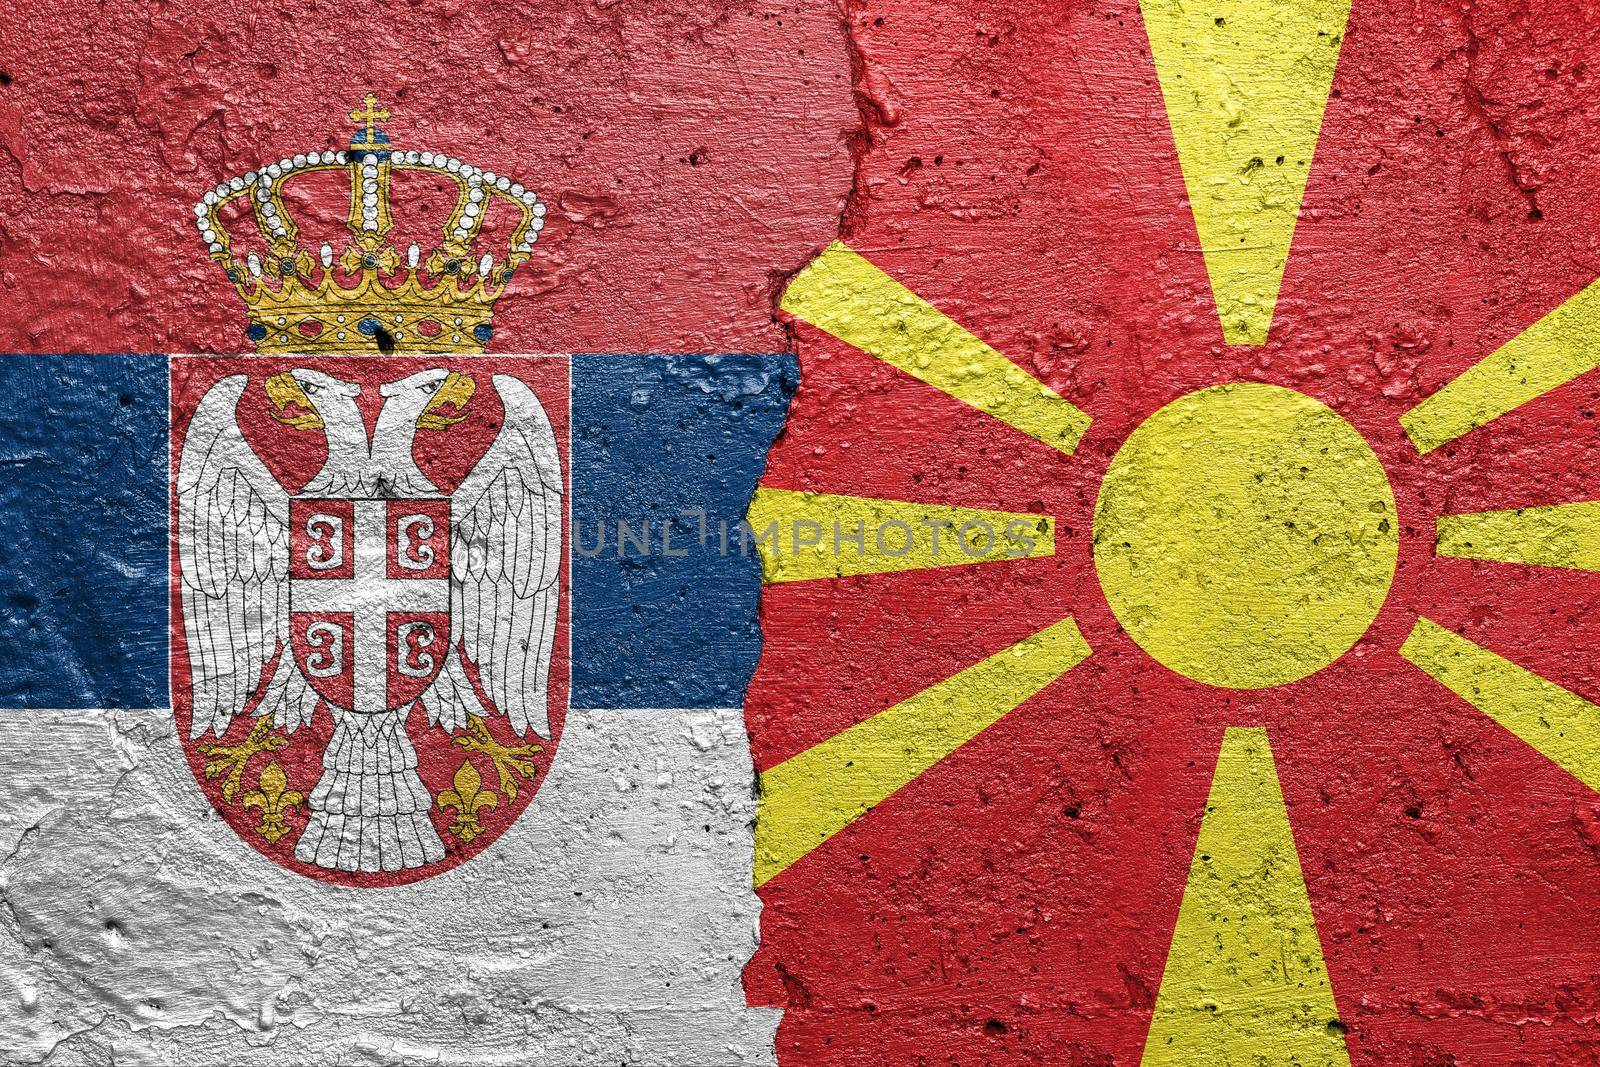 Serbia and North Macedonia - Cracked concrete wall painted with a Serbian flag on the left and a Macedonian flag on the right stock photo by adamr